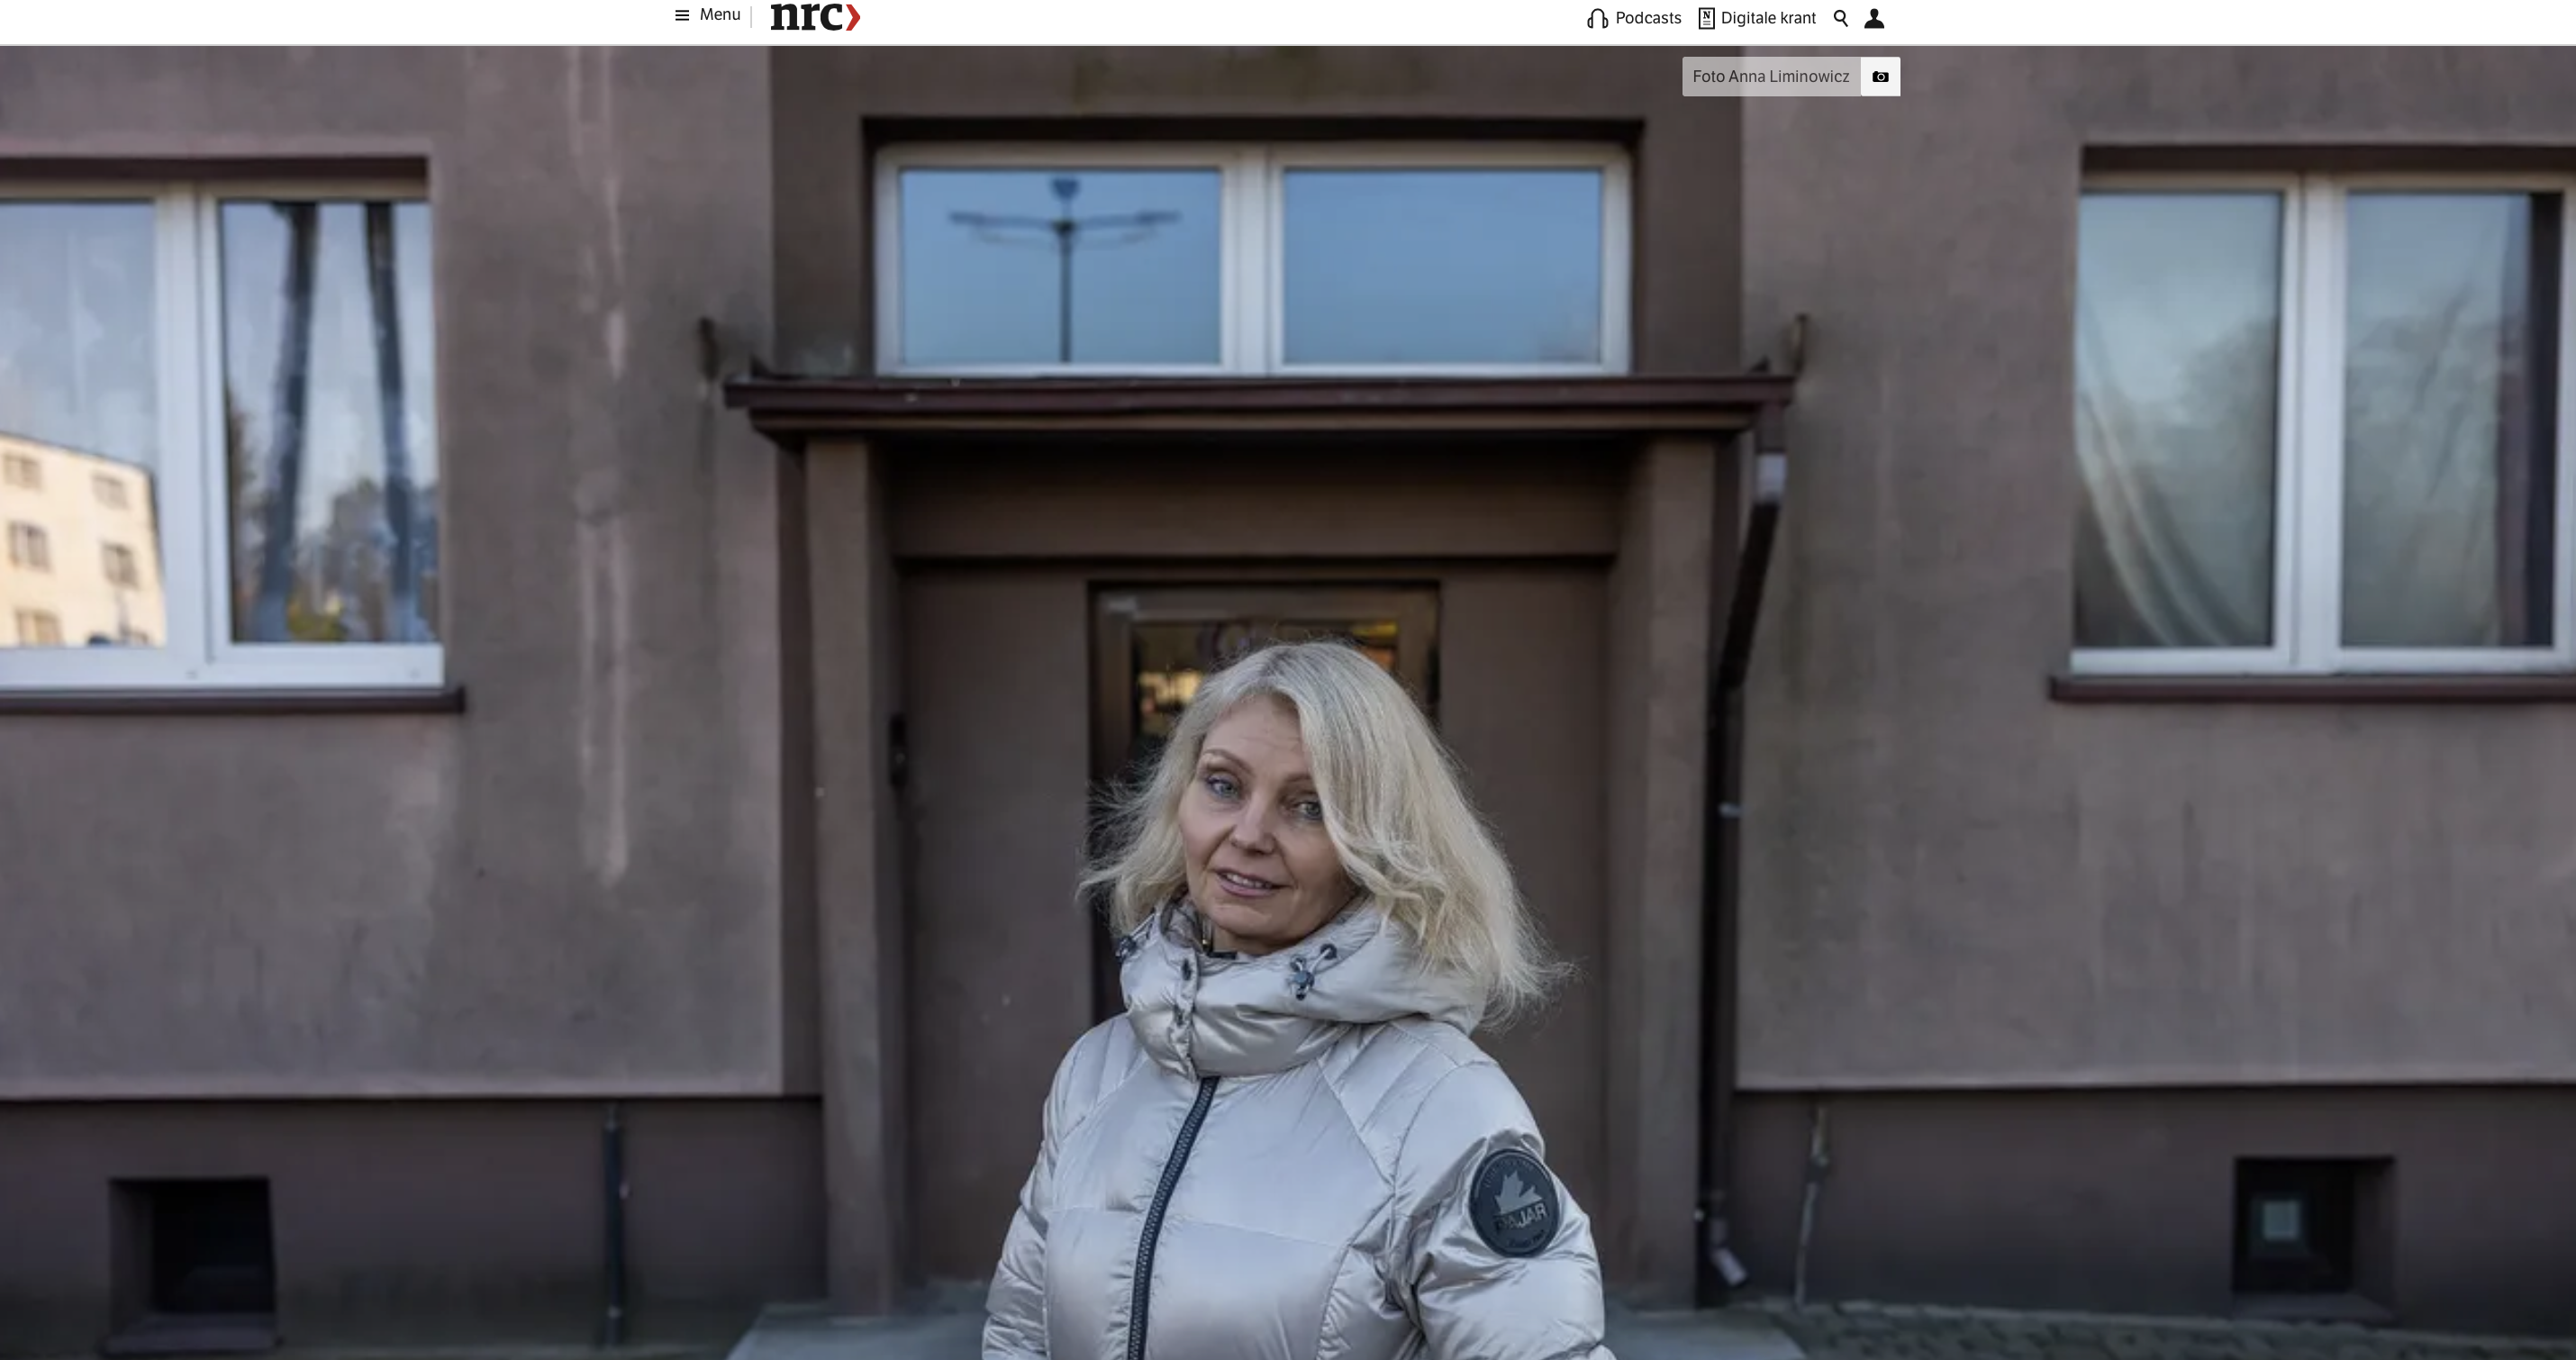 Art and Documentary Photography - Loading nrc_anna_liminowicz_4.png